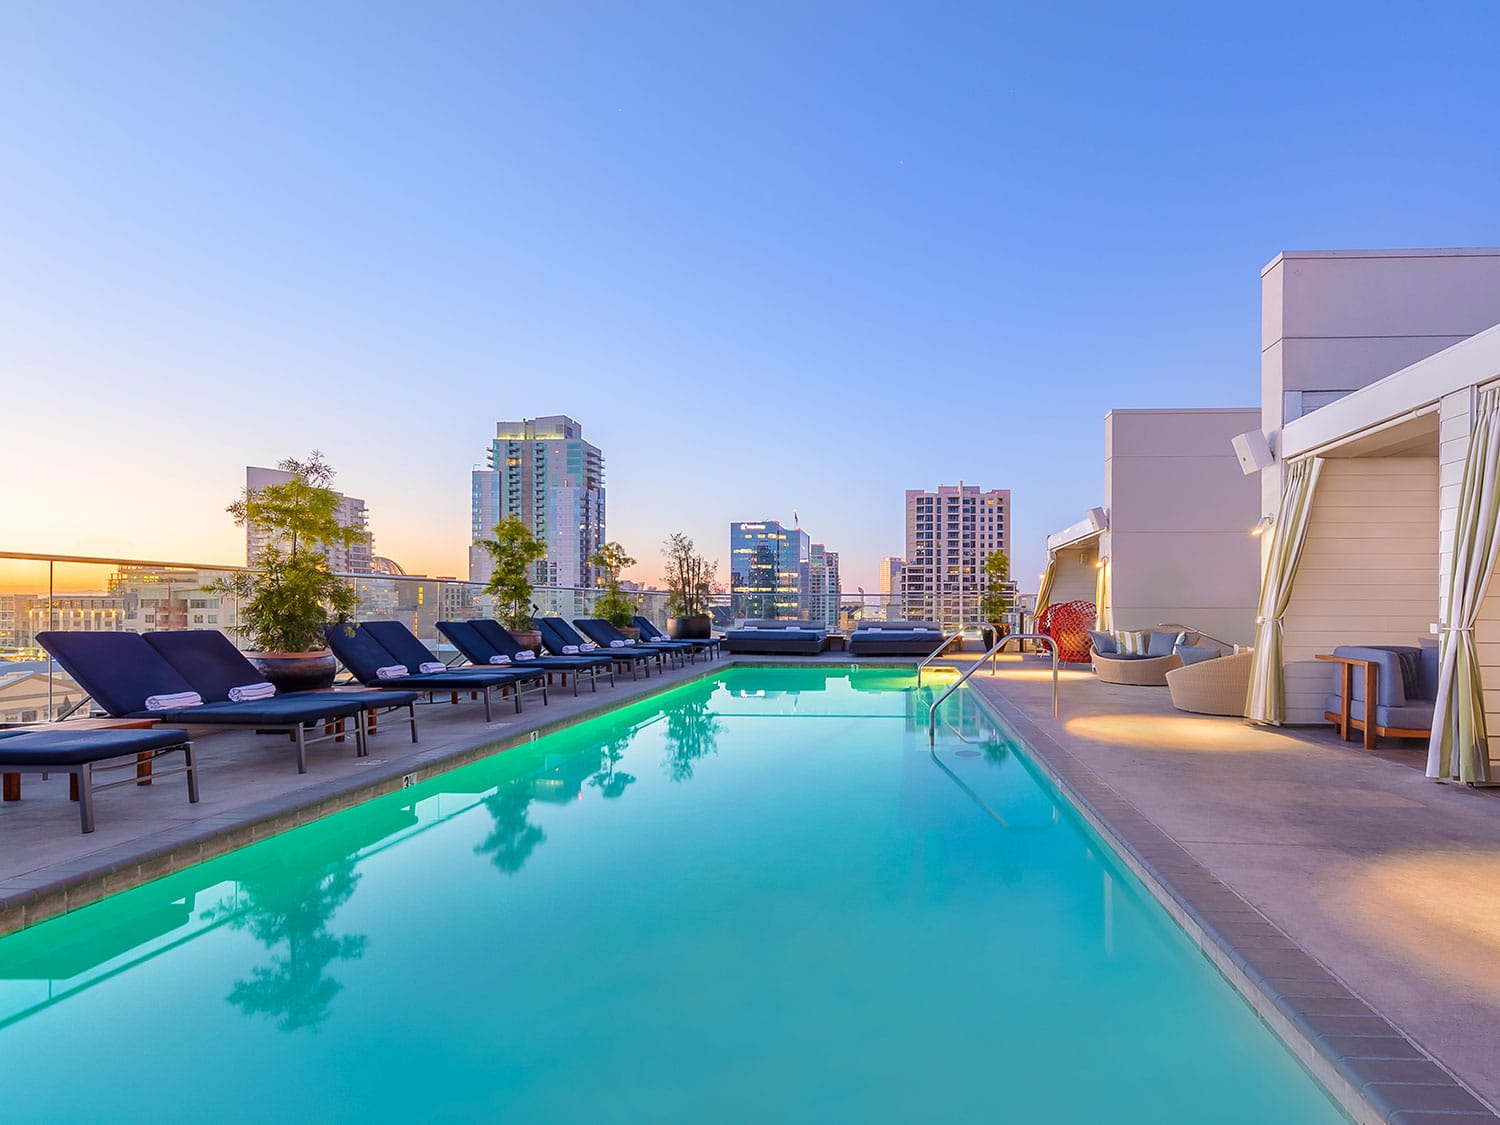 The view from the rooftop pool at Andaz San Diego in California.